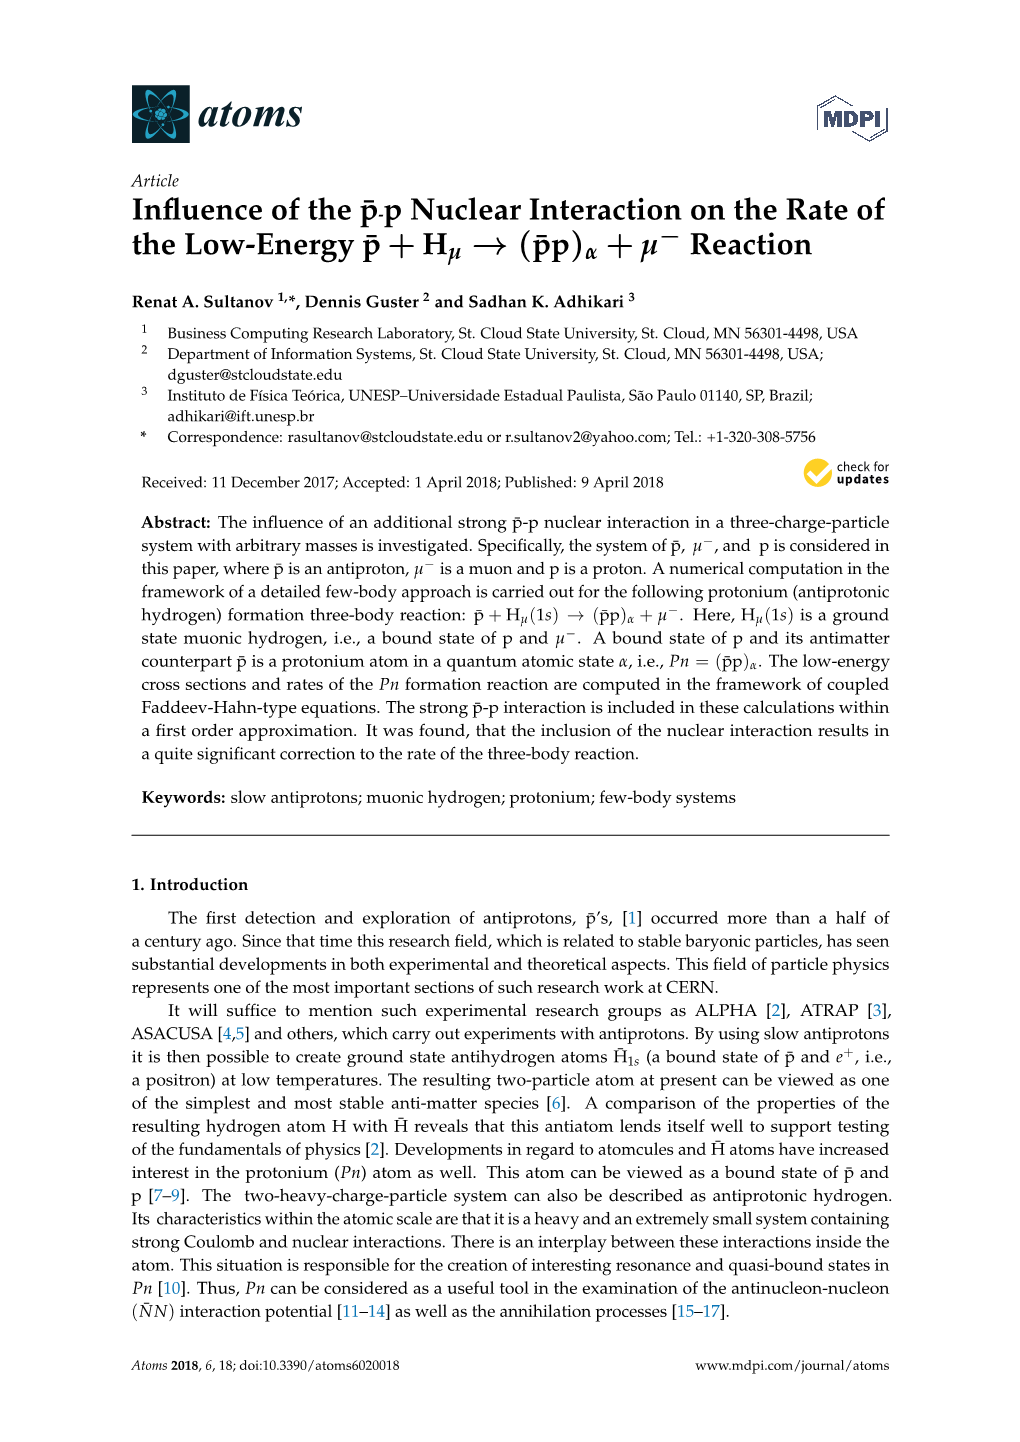 Influence of the ¯P-P Nuclear Interaction on the Rate Of